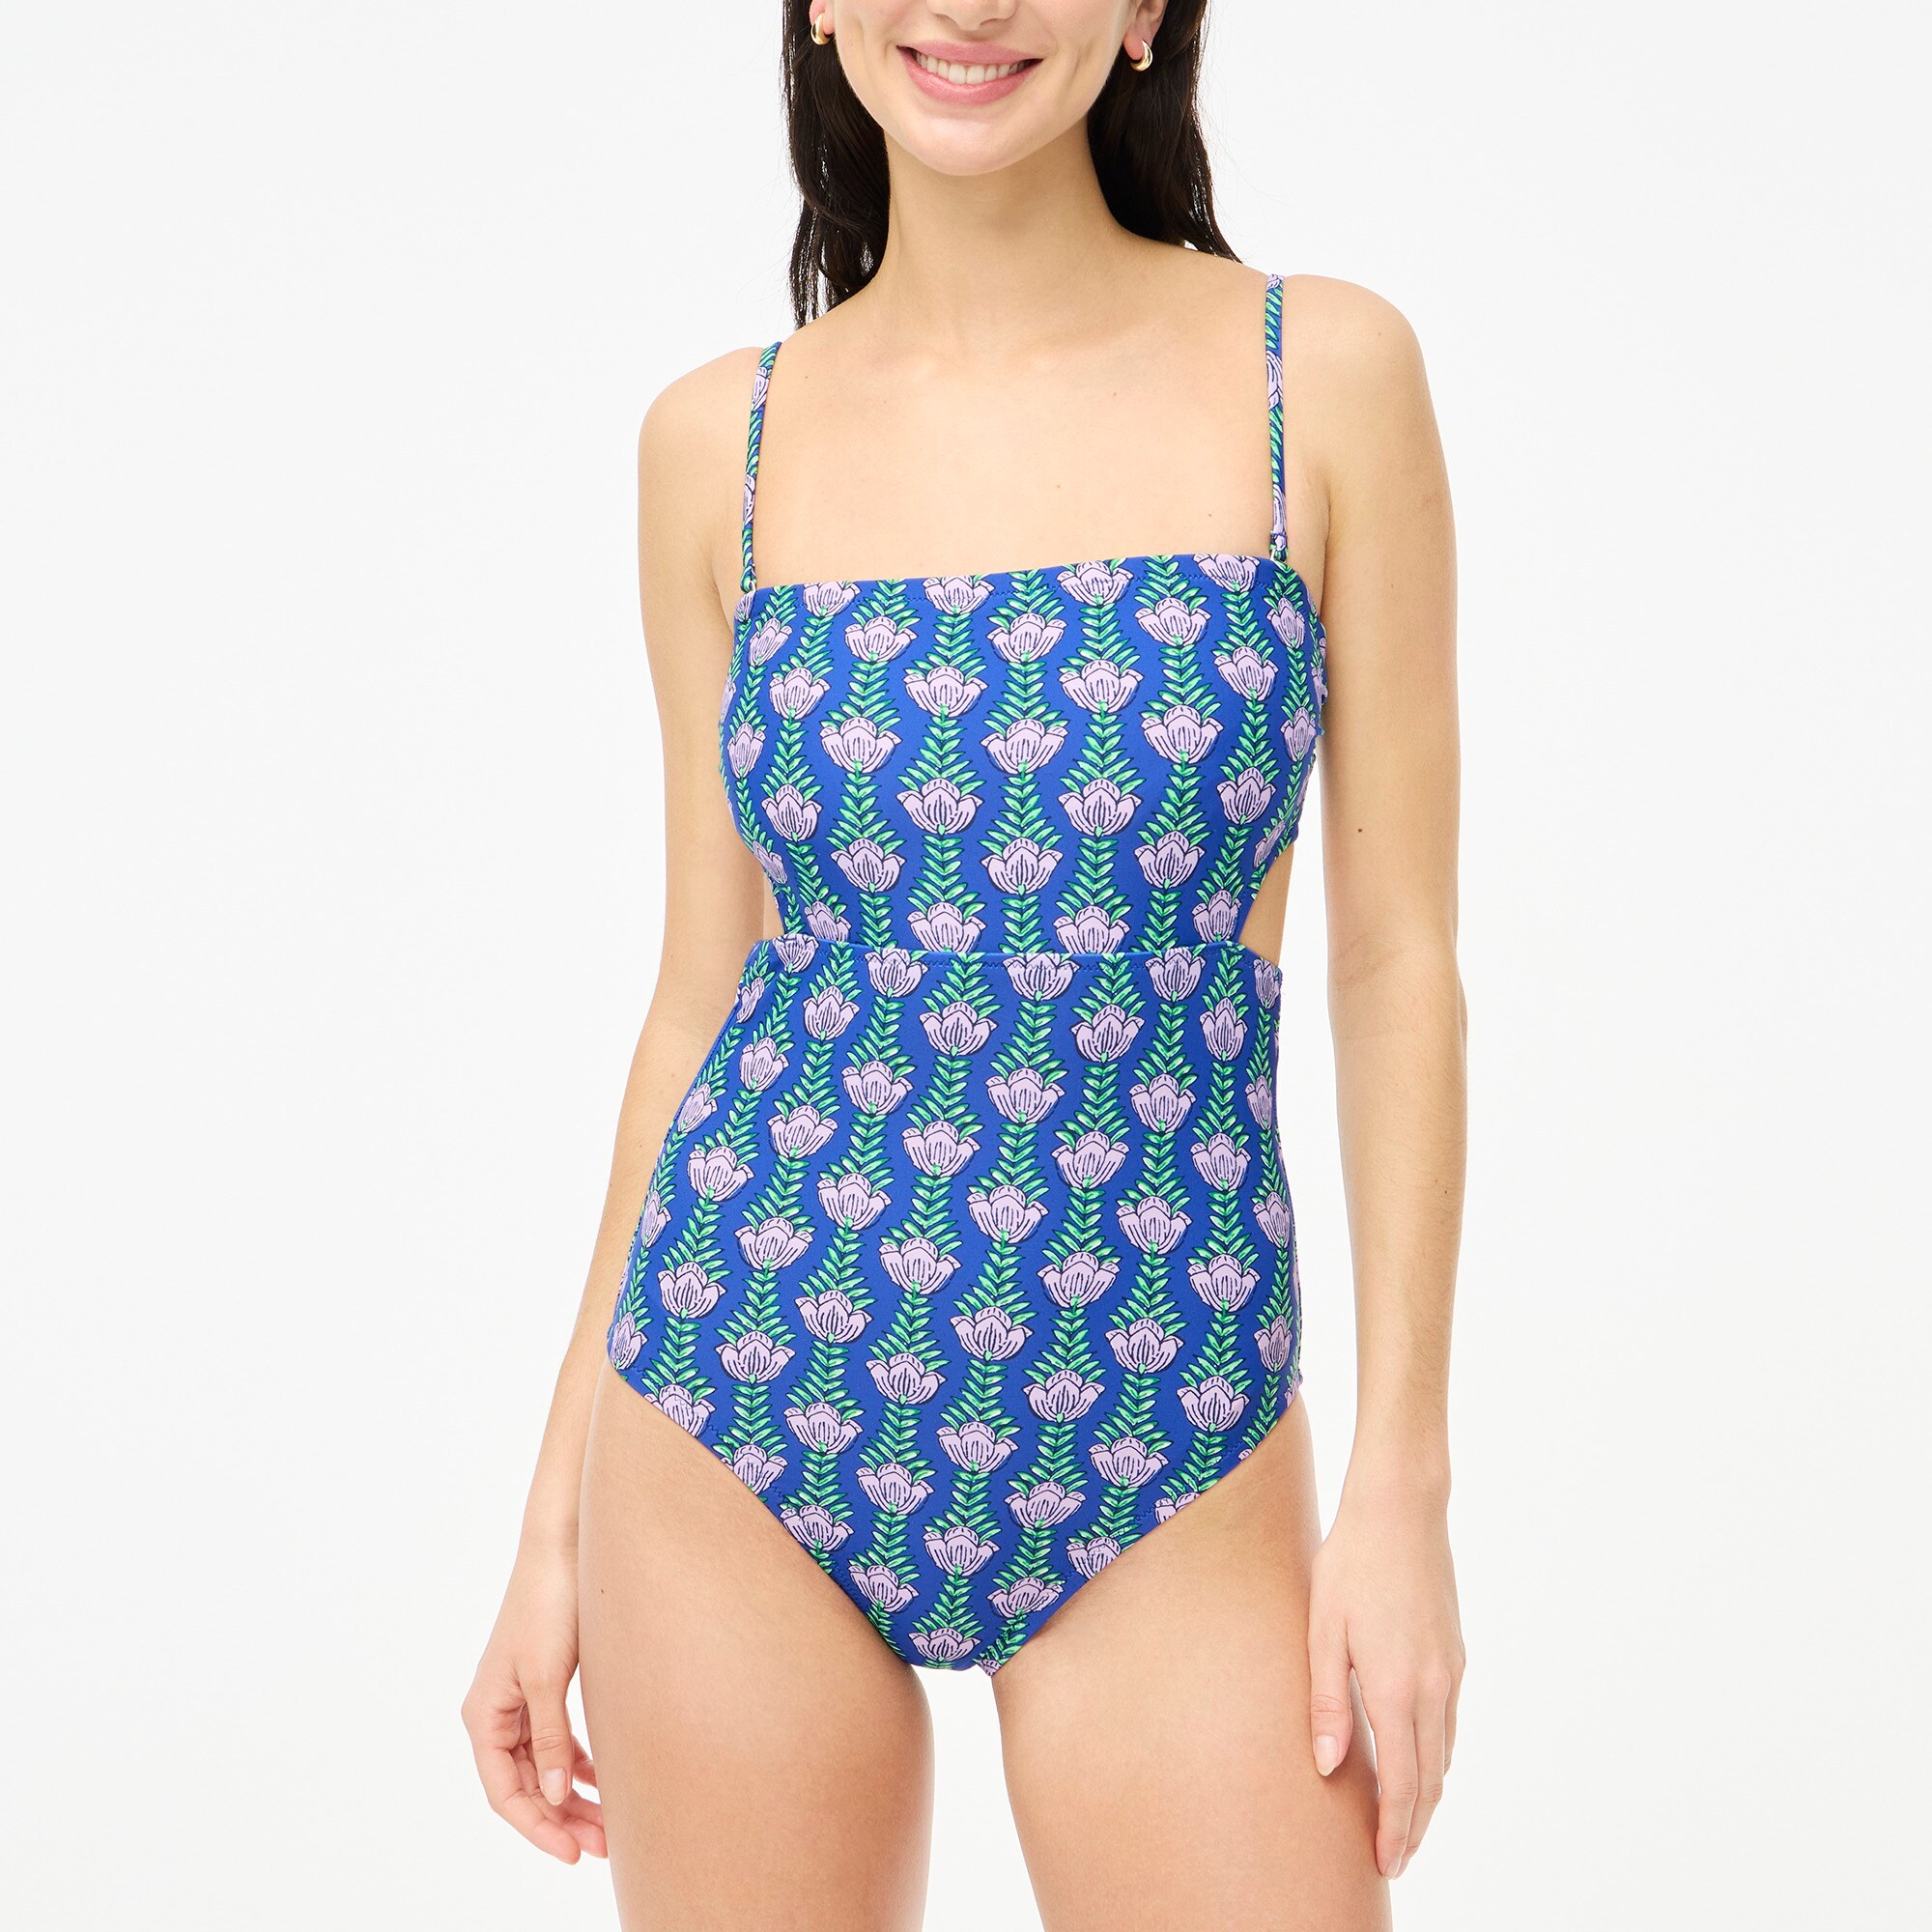  Printed cutout one-piece swimsuit